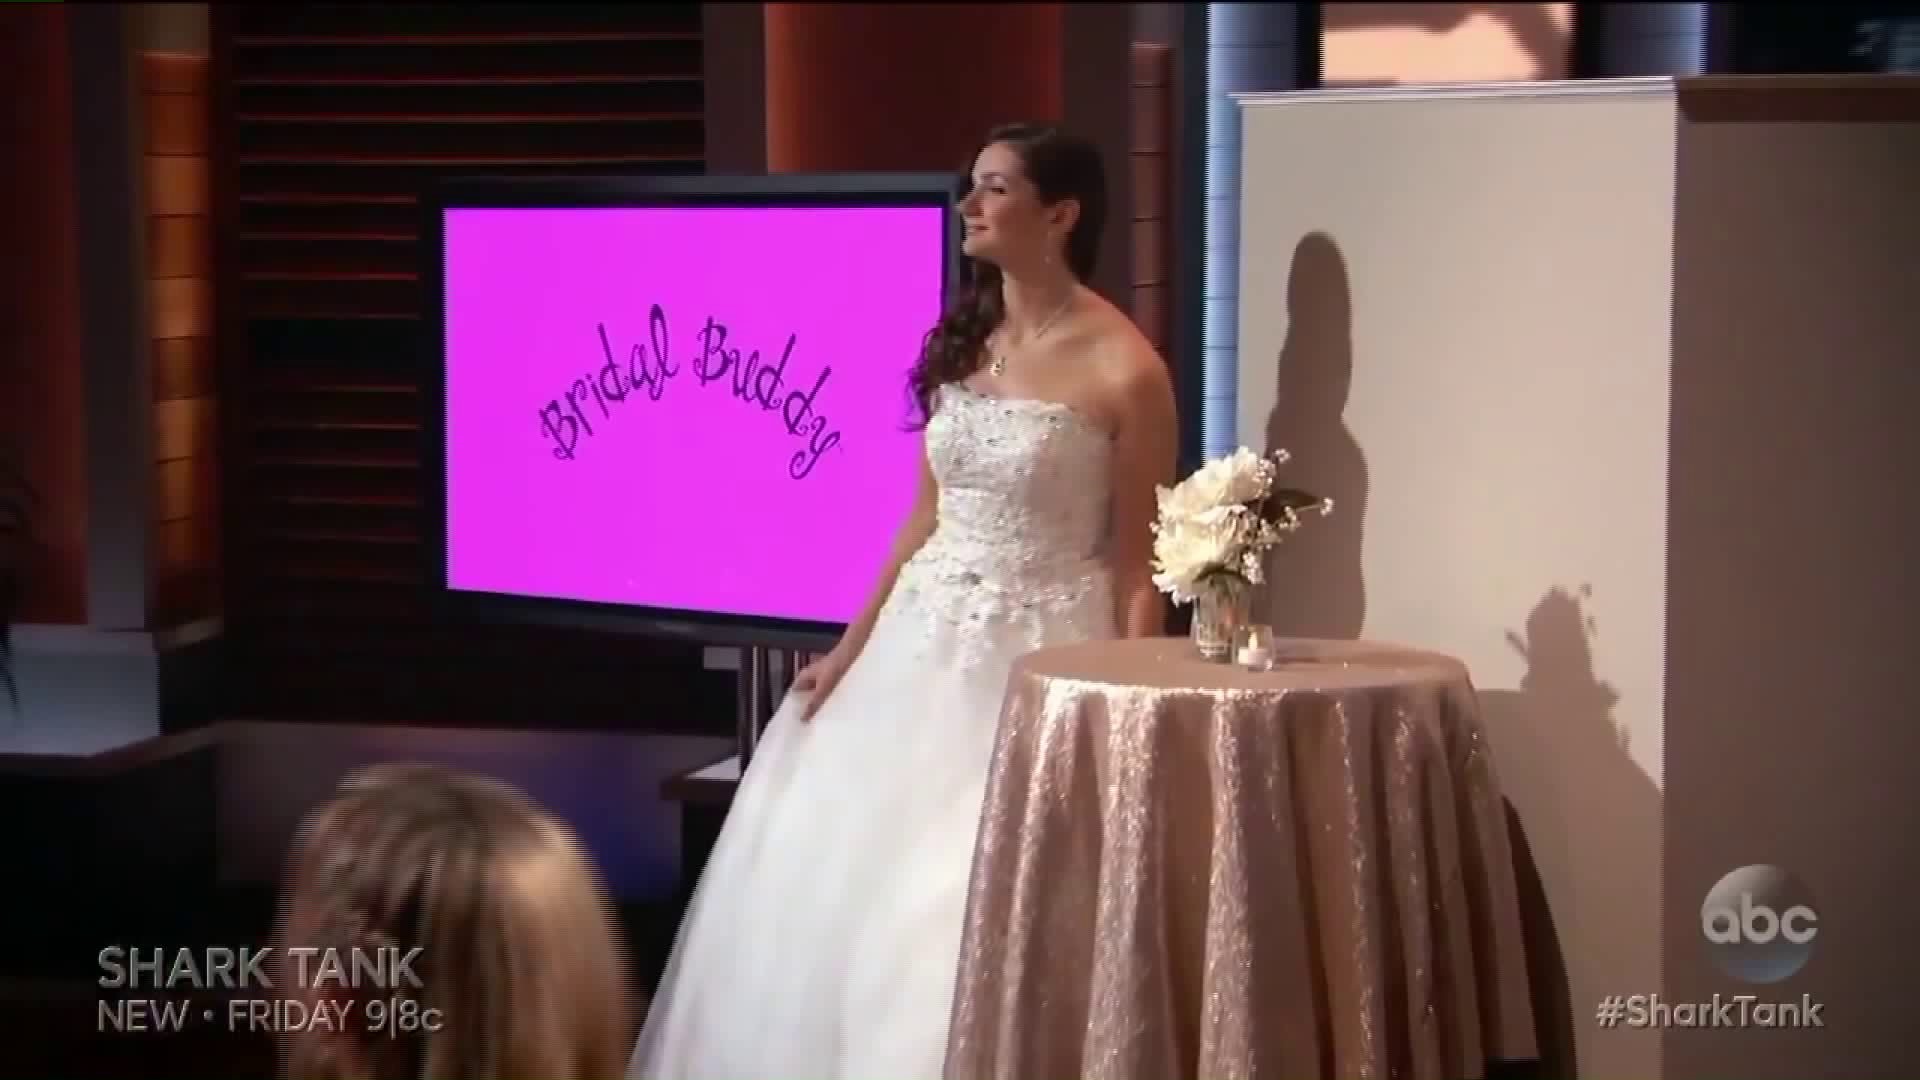 Bridal Buddy Shark Tank - Founder, Net Worth and Investment